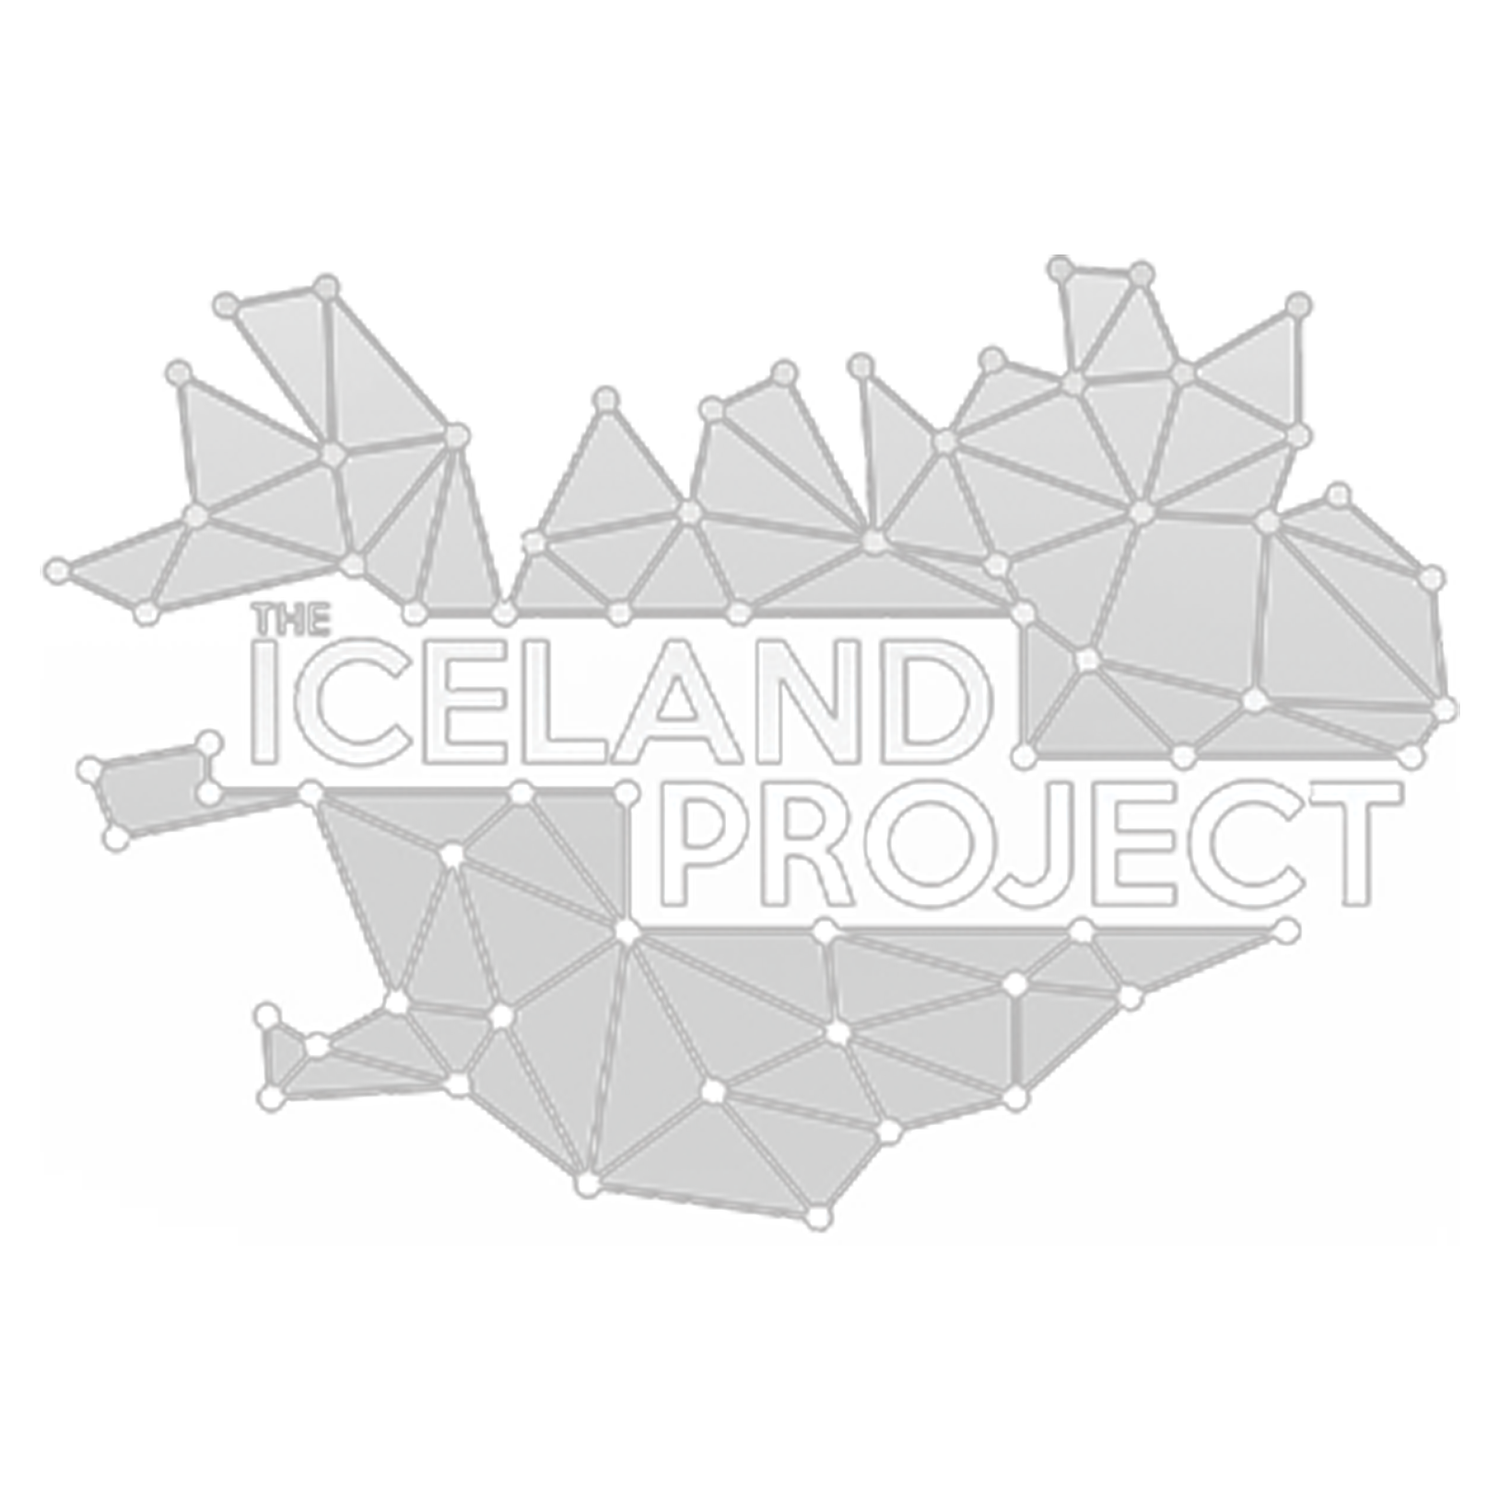 The Iceland Project